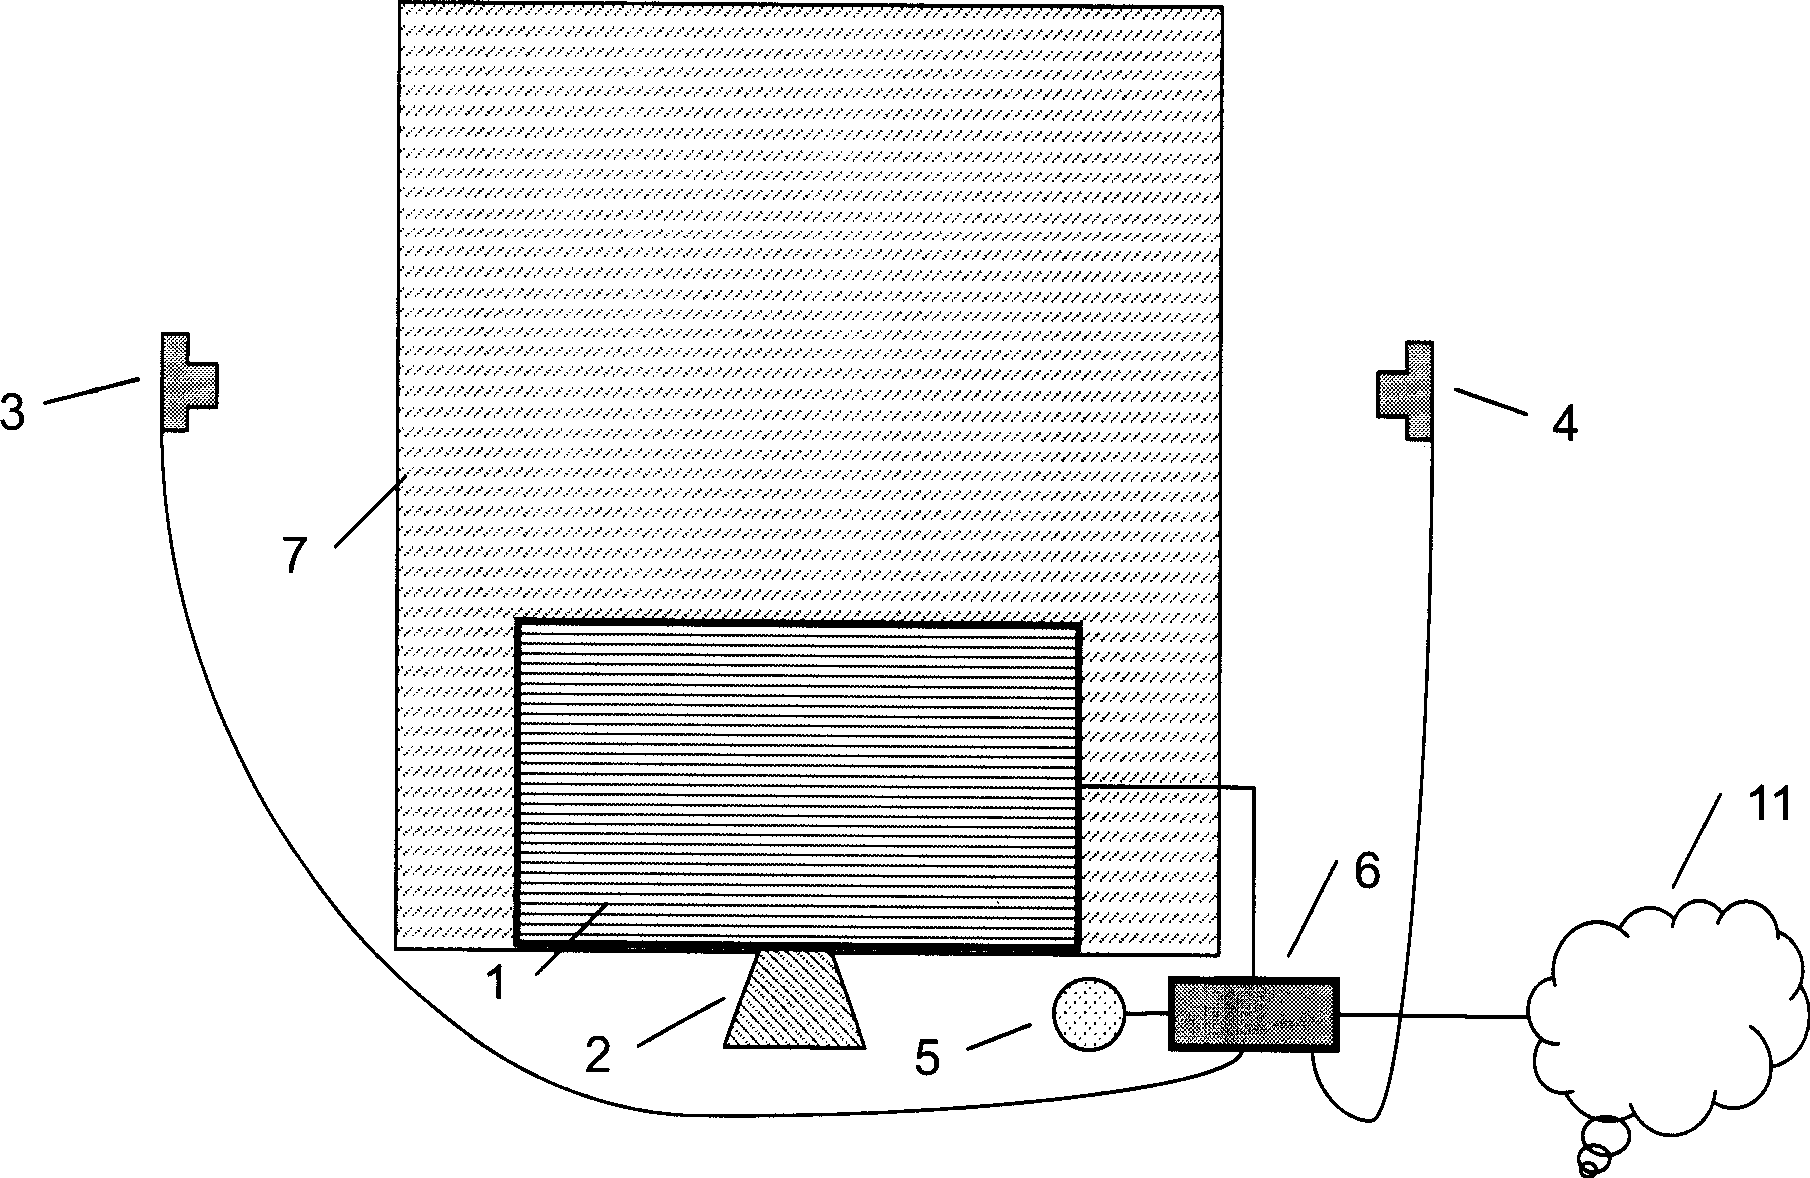 Video image system and uses thereof